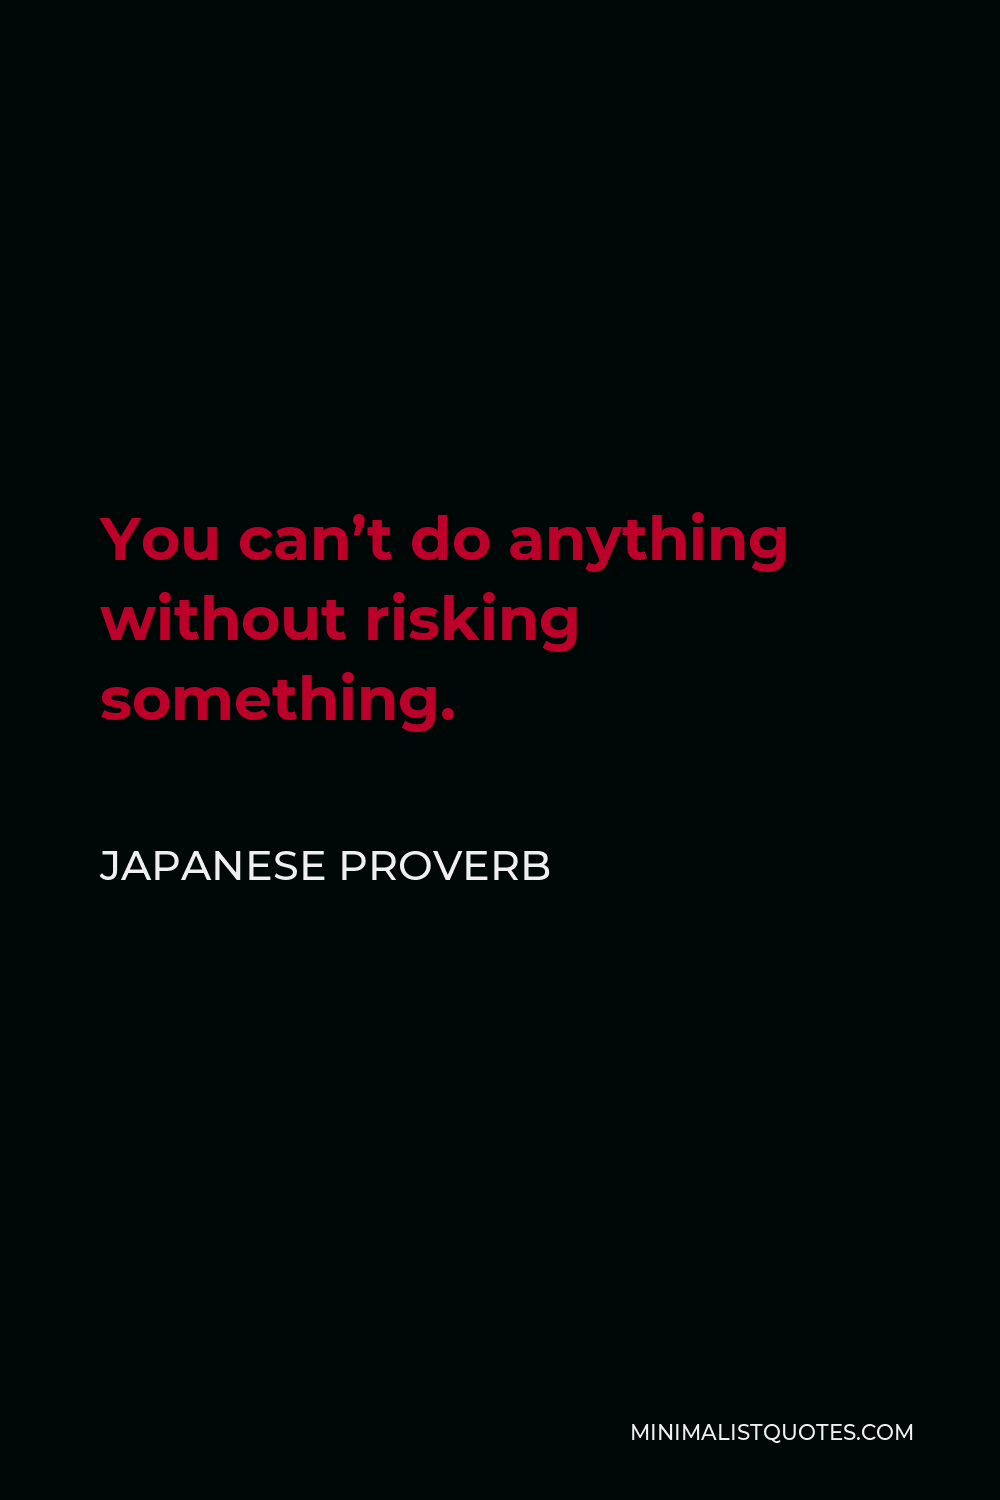 Japanese Proverb Quote - You can’t do anything without risking something.